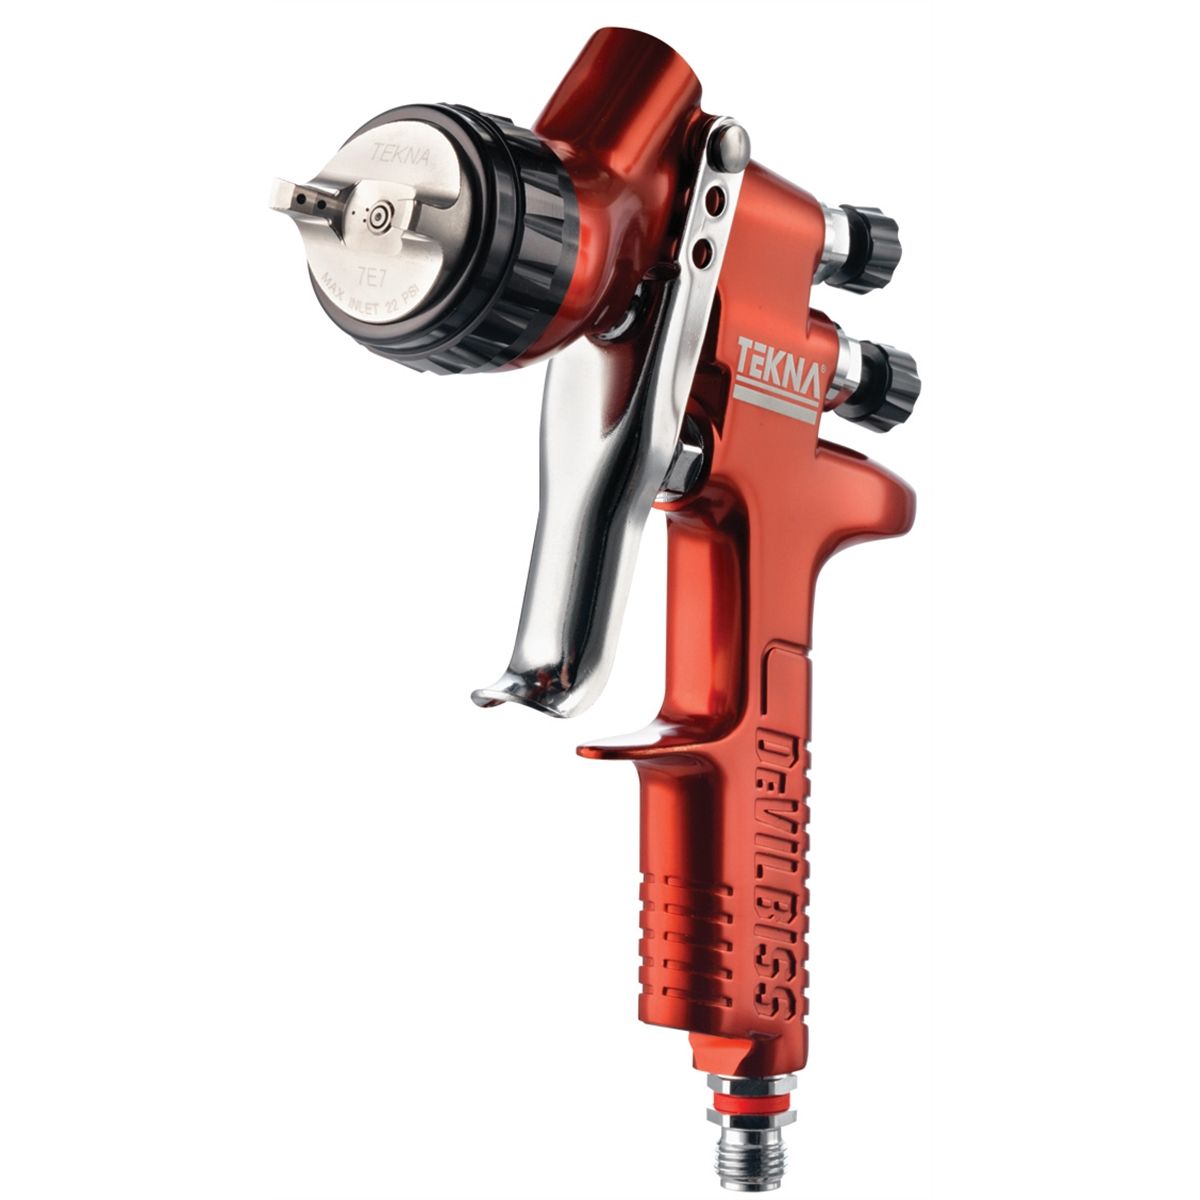 Tekna Copper Gravity Feed Spray Gun Uncupped, 1.3 and 1.4 Needle